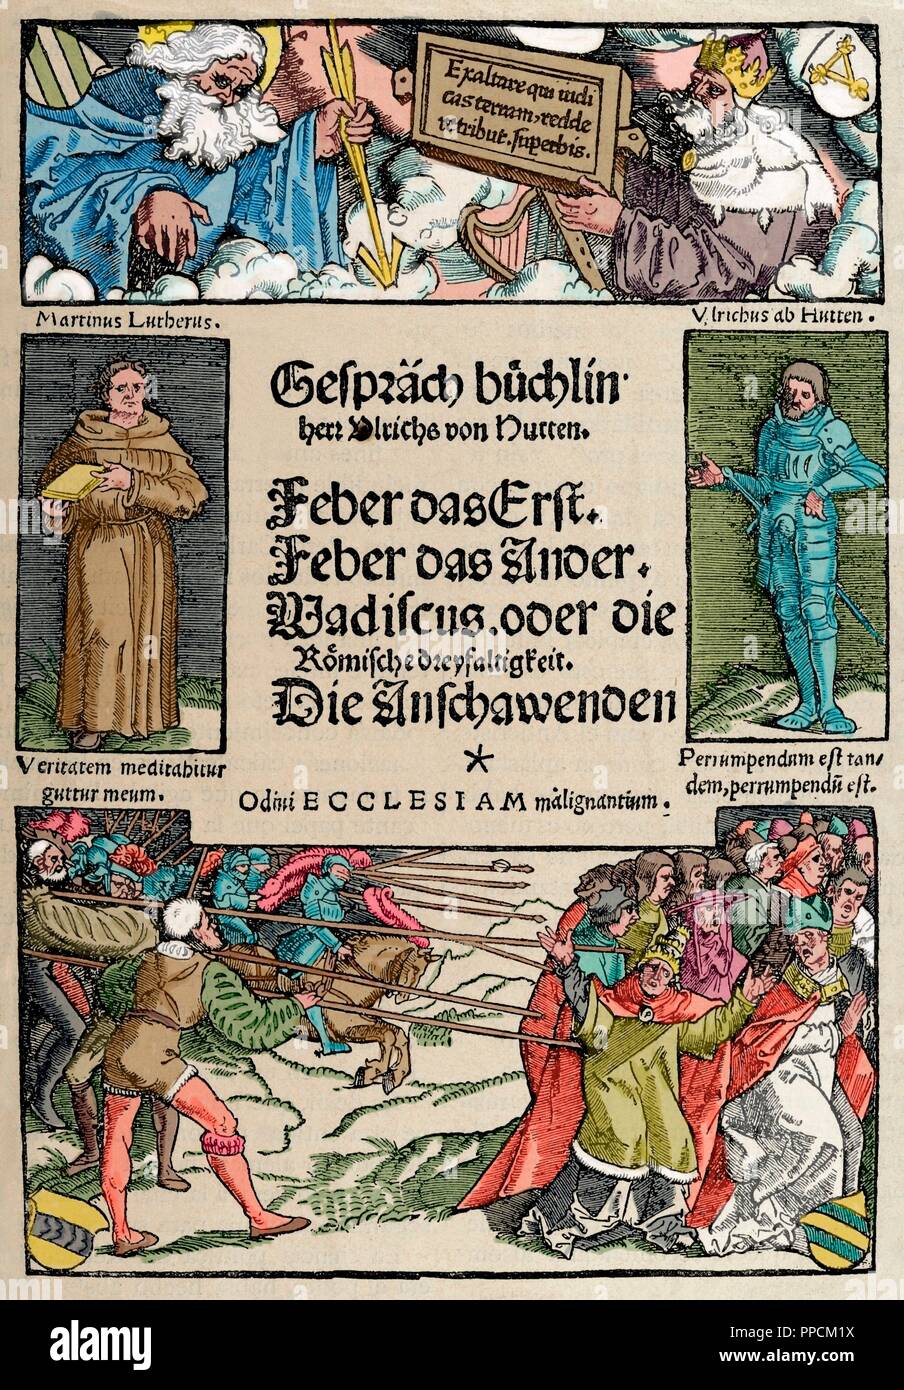 Ulrich von Hutten (1488-1523). German writer and theologian. Booklet of Conversations. Cover. Facsimile. Engraving in The History of Germany, 1882. Colored. Stock Photo